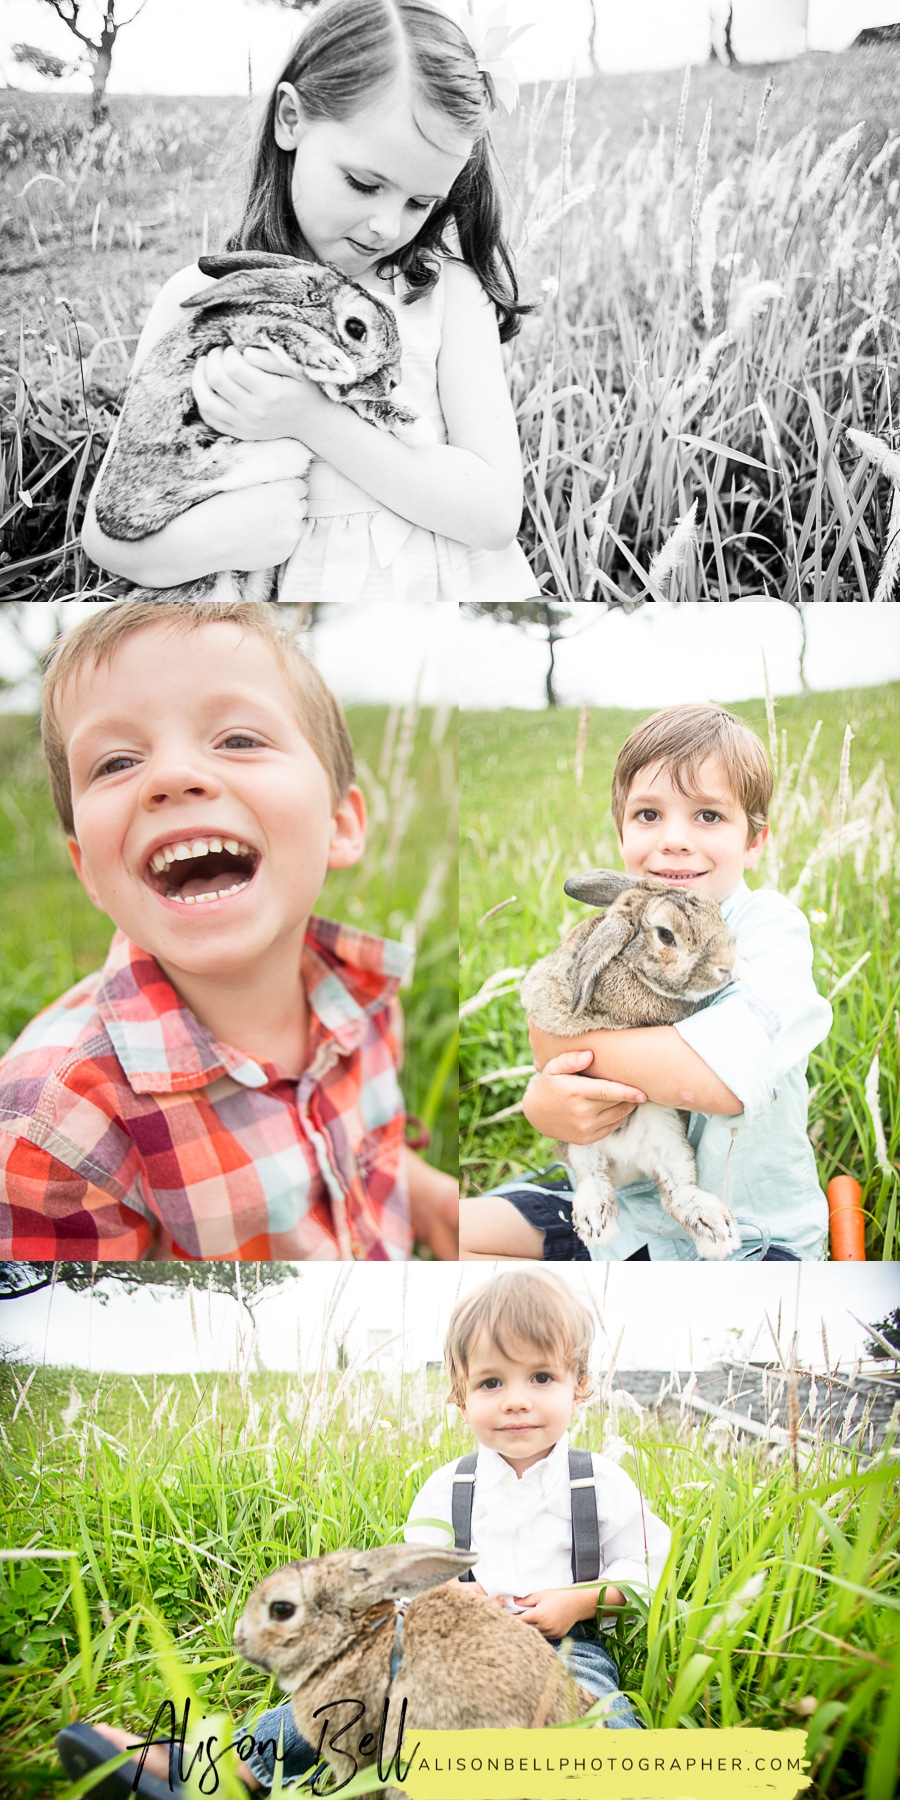 Mini session photography with a live bunny for easter by Alison Bell Photographer